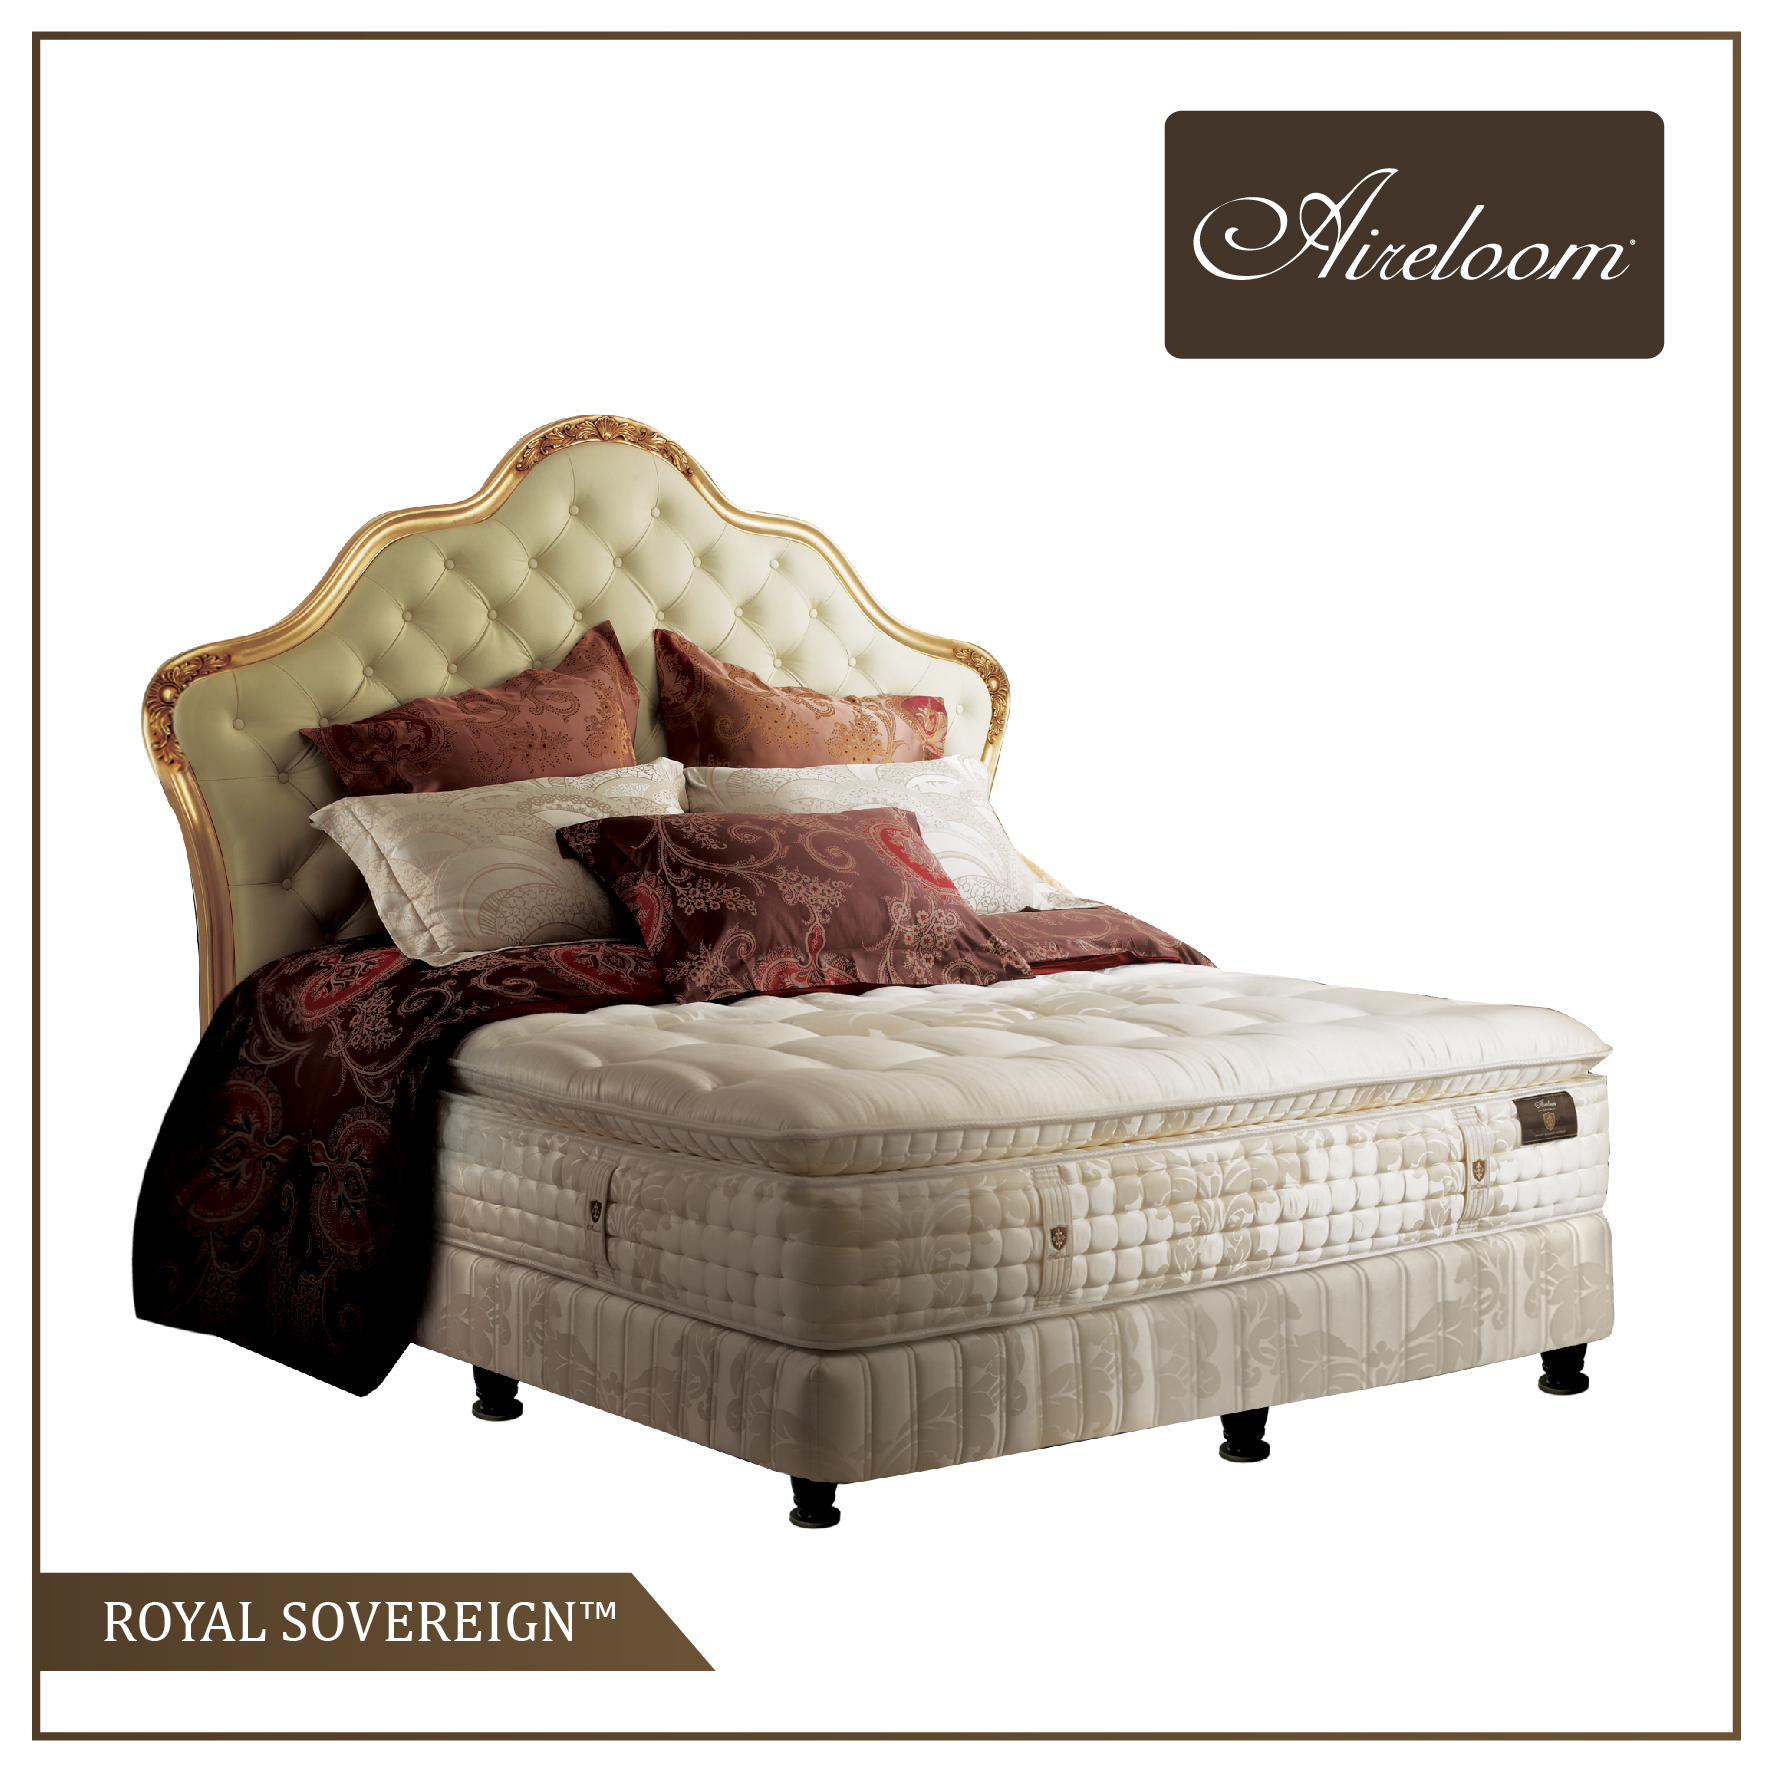 Ook breedte spade Aireloom Spring Bed Royal Sovereign - Mattress Only|| Sleep & Co